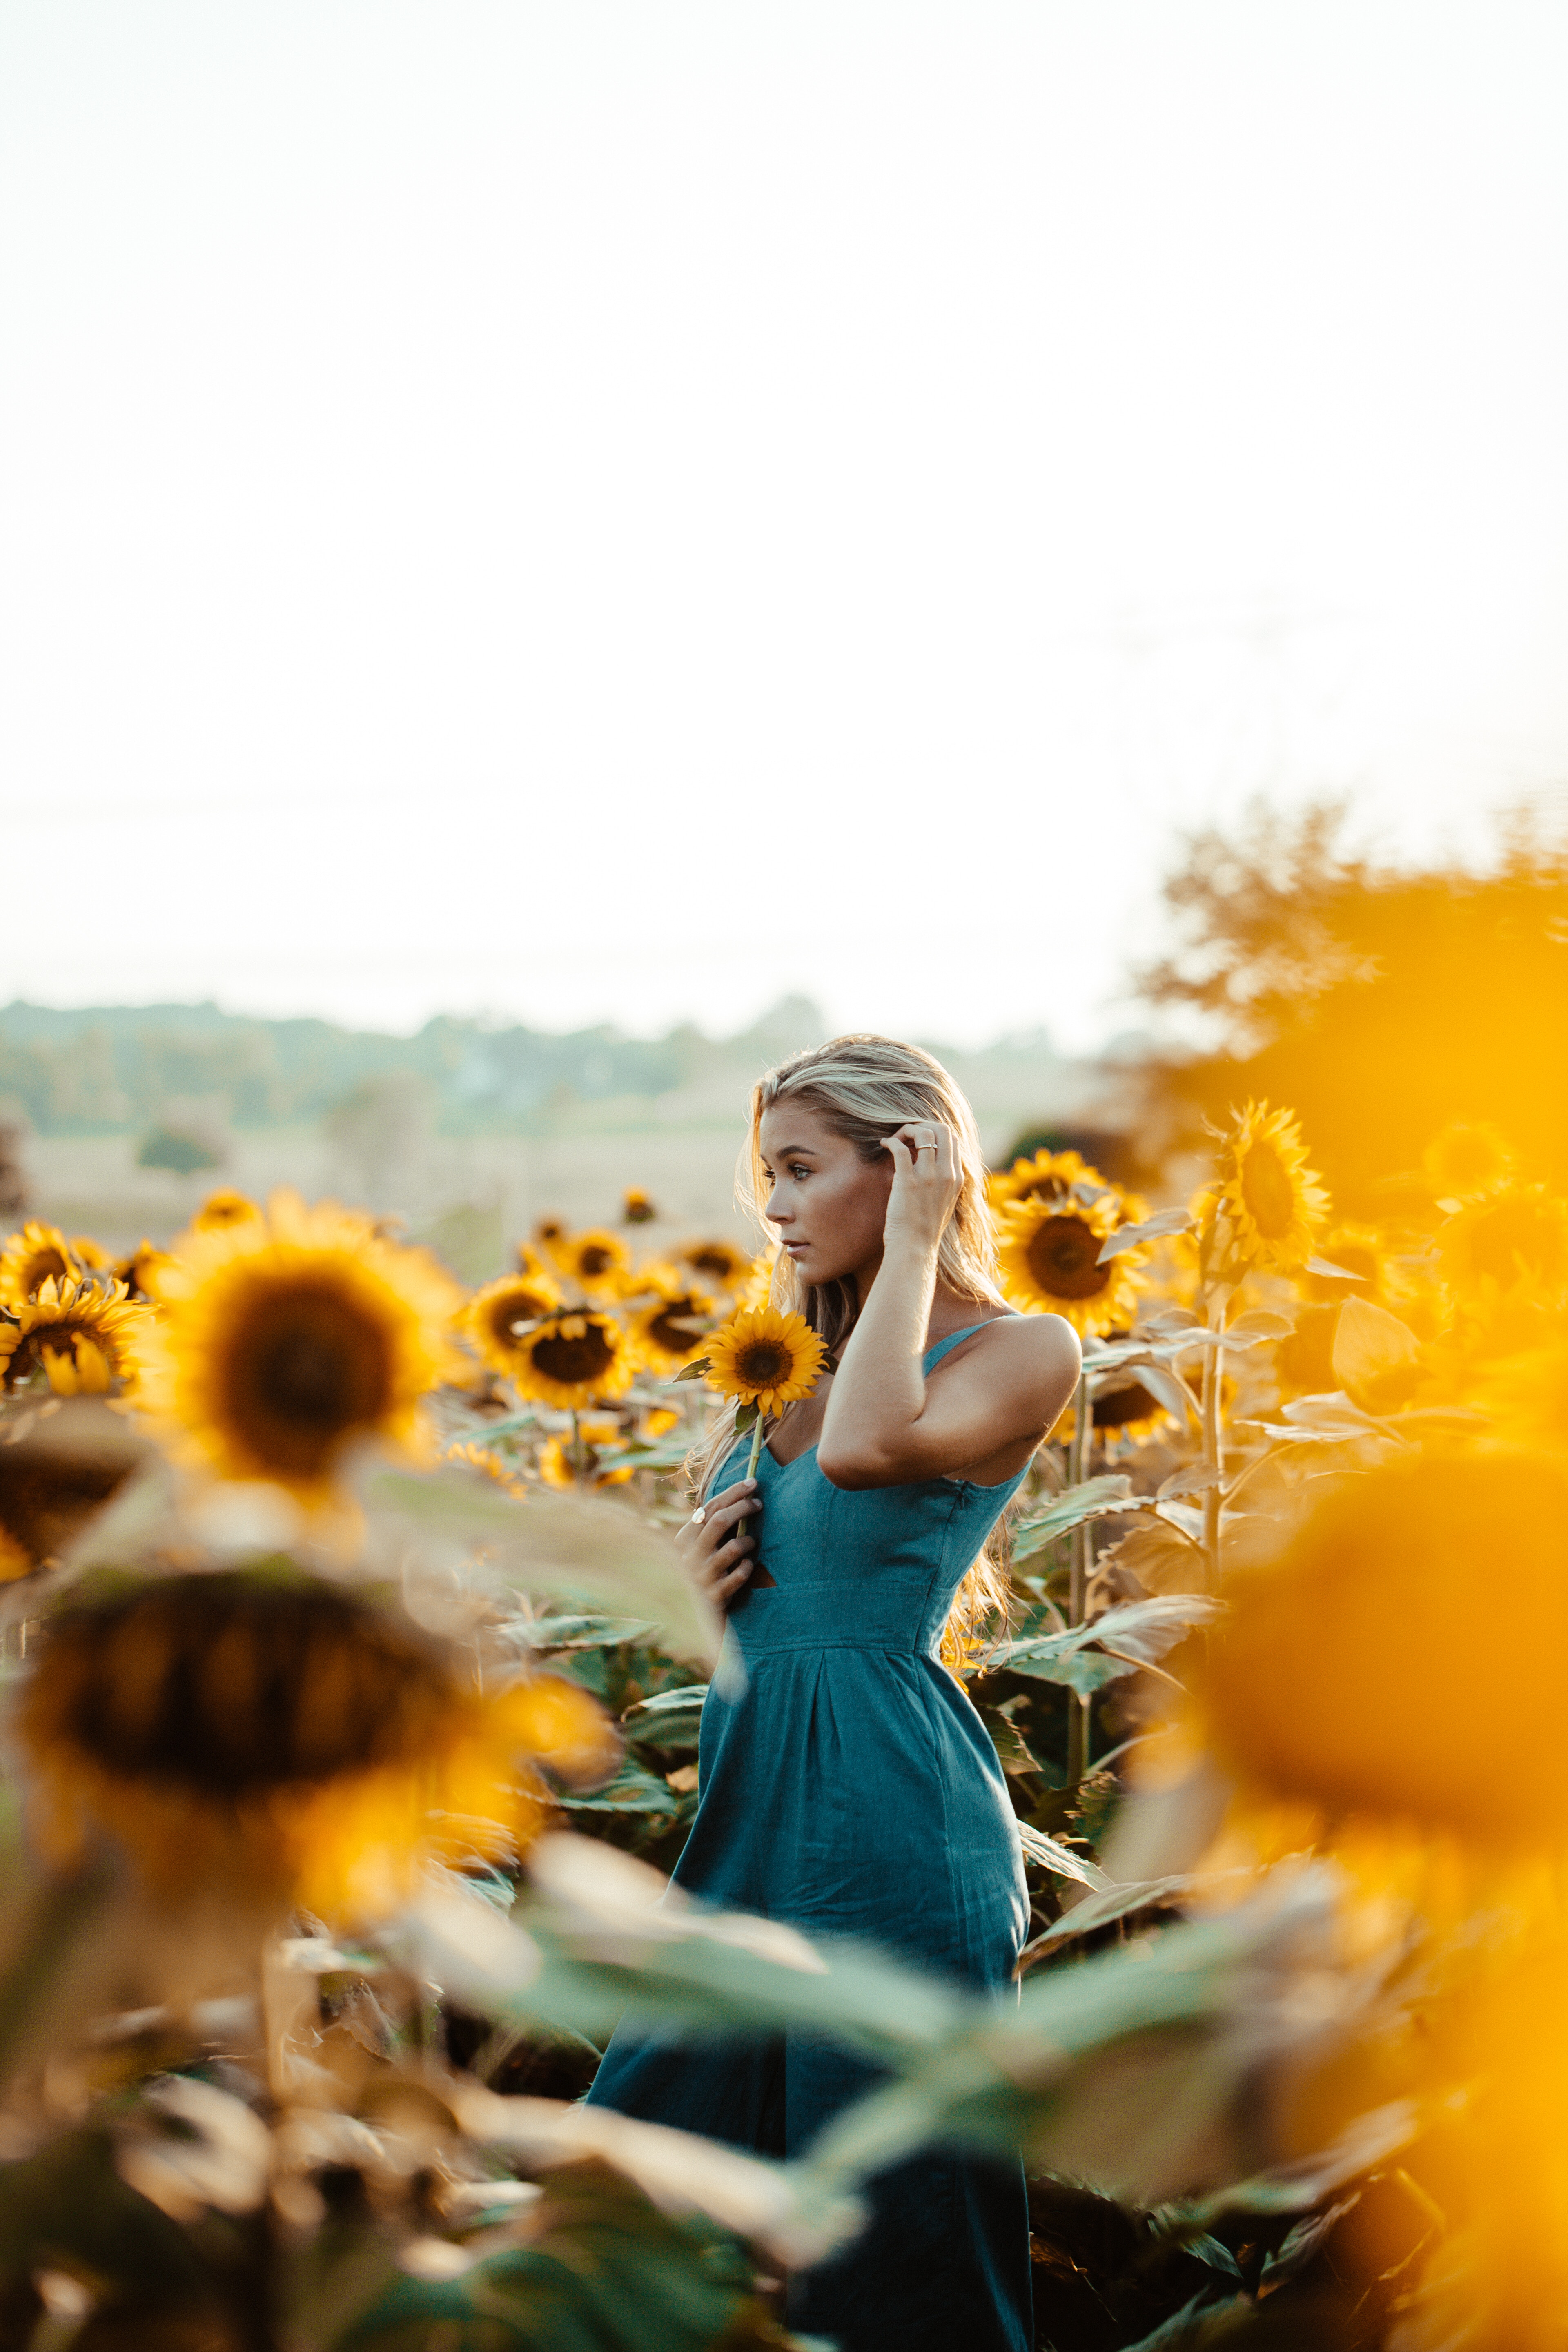 The Sunflower Photography Workshop: Tips and Tricks for Capturing These Magical Flowers